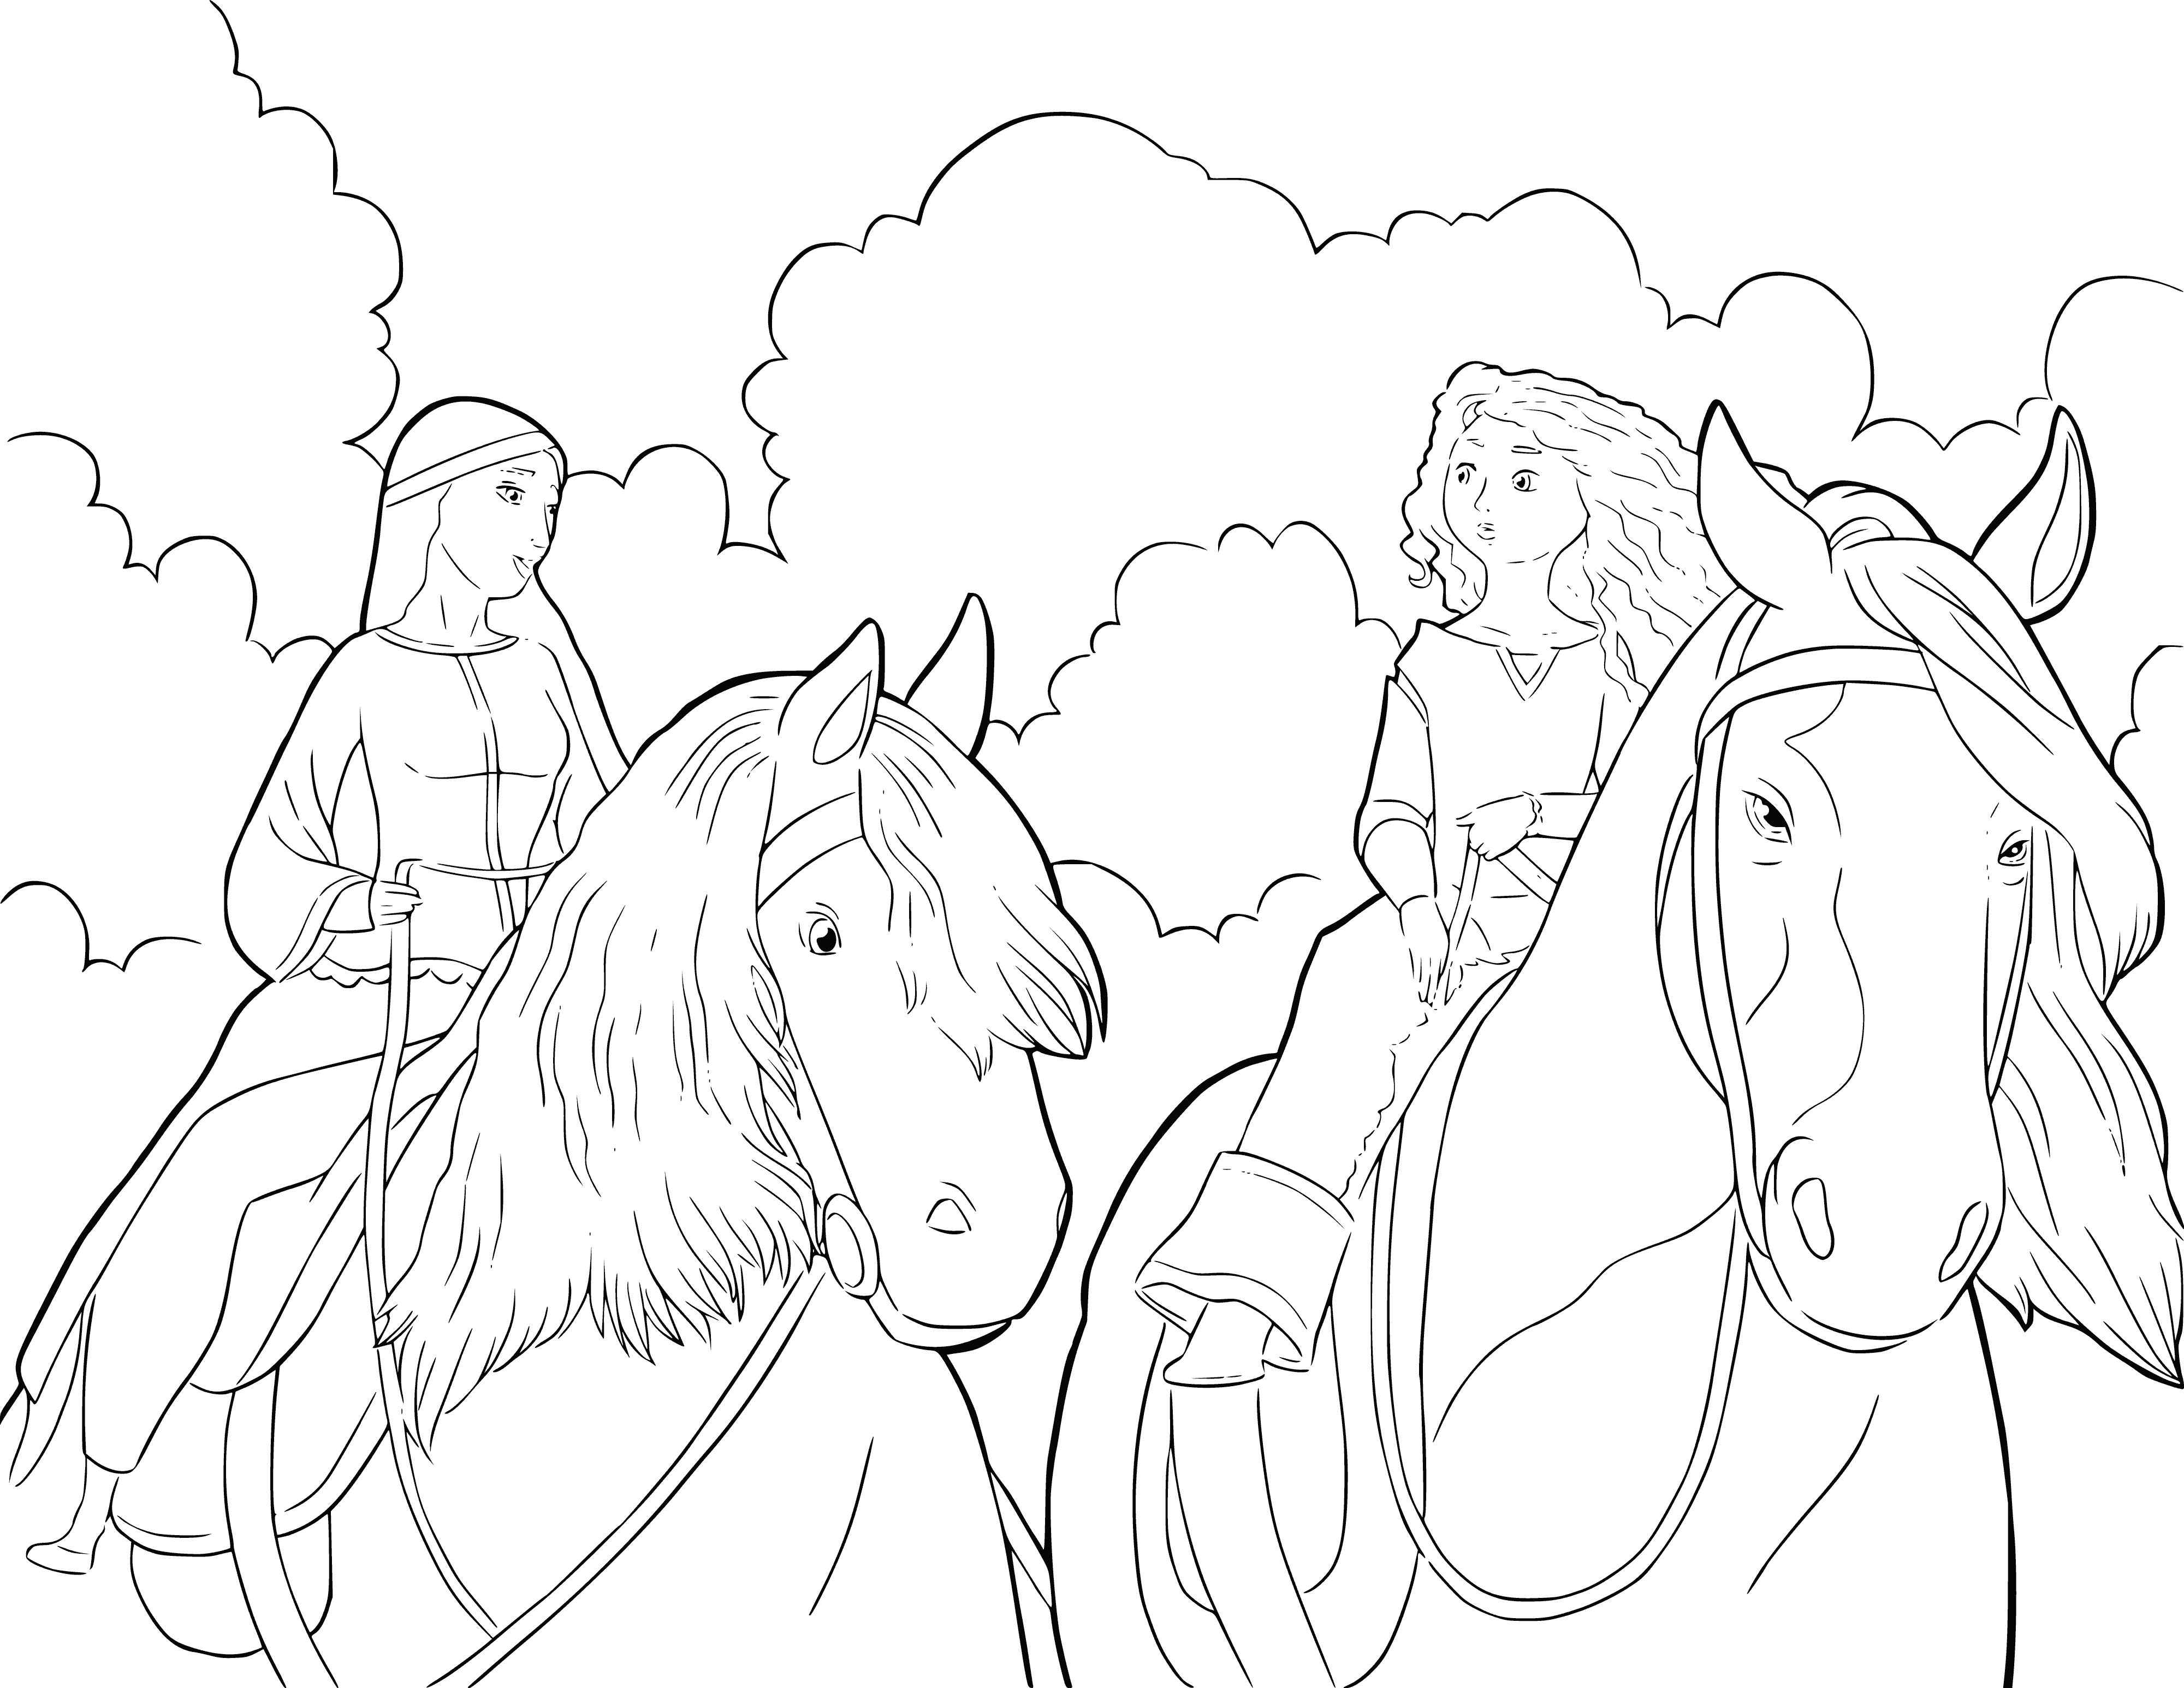 coloring page: Queen Elinor & Princess Merida: Elinor stands proud while Merida strings her bow with a fiery expression & wind-blown red hair.